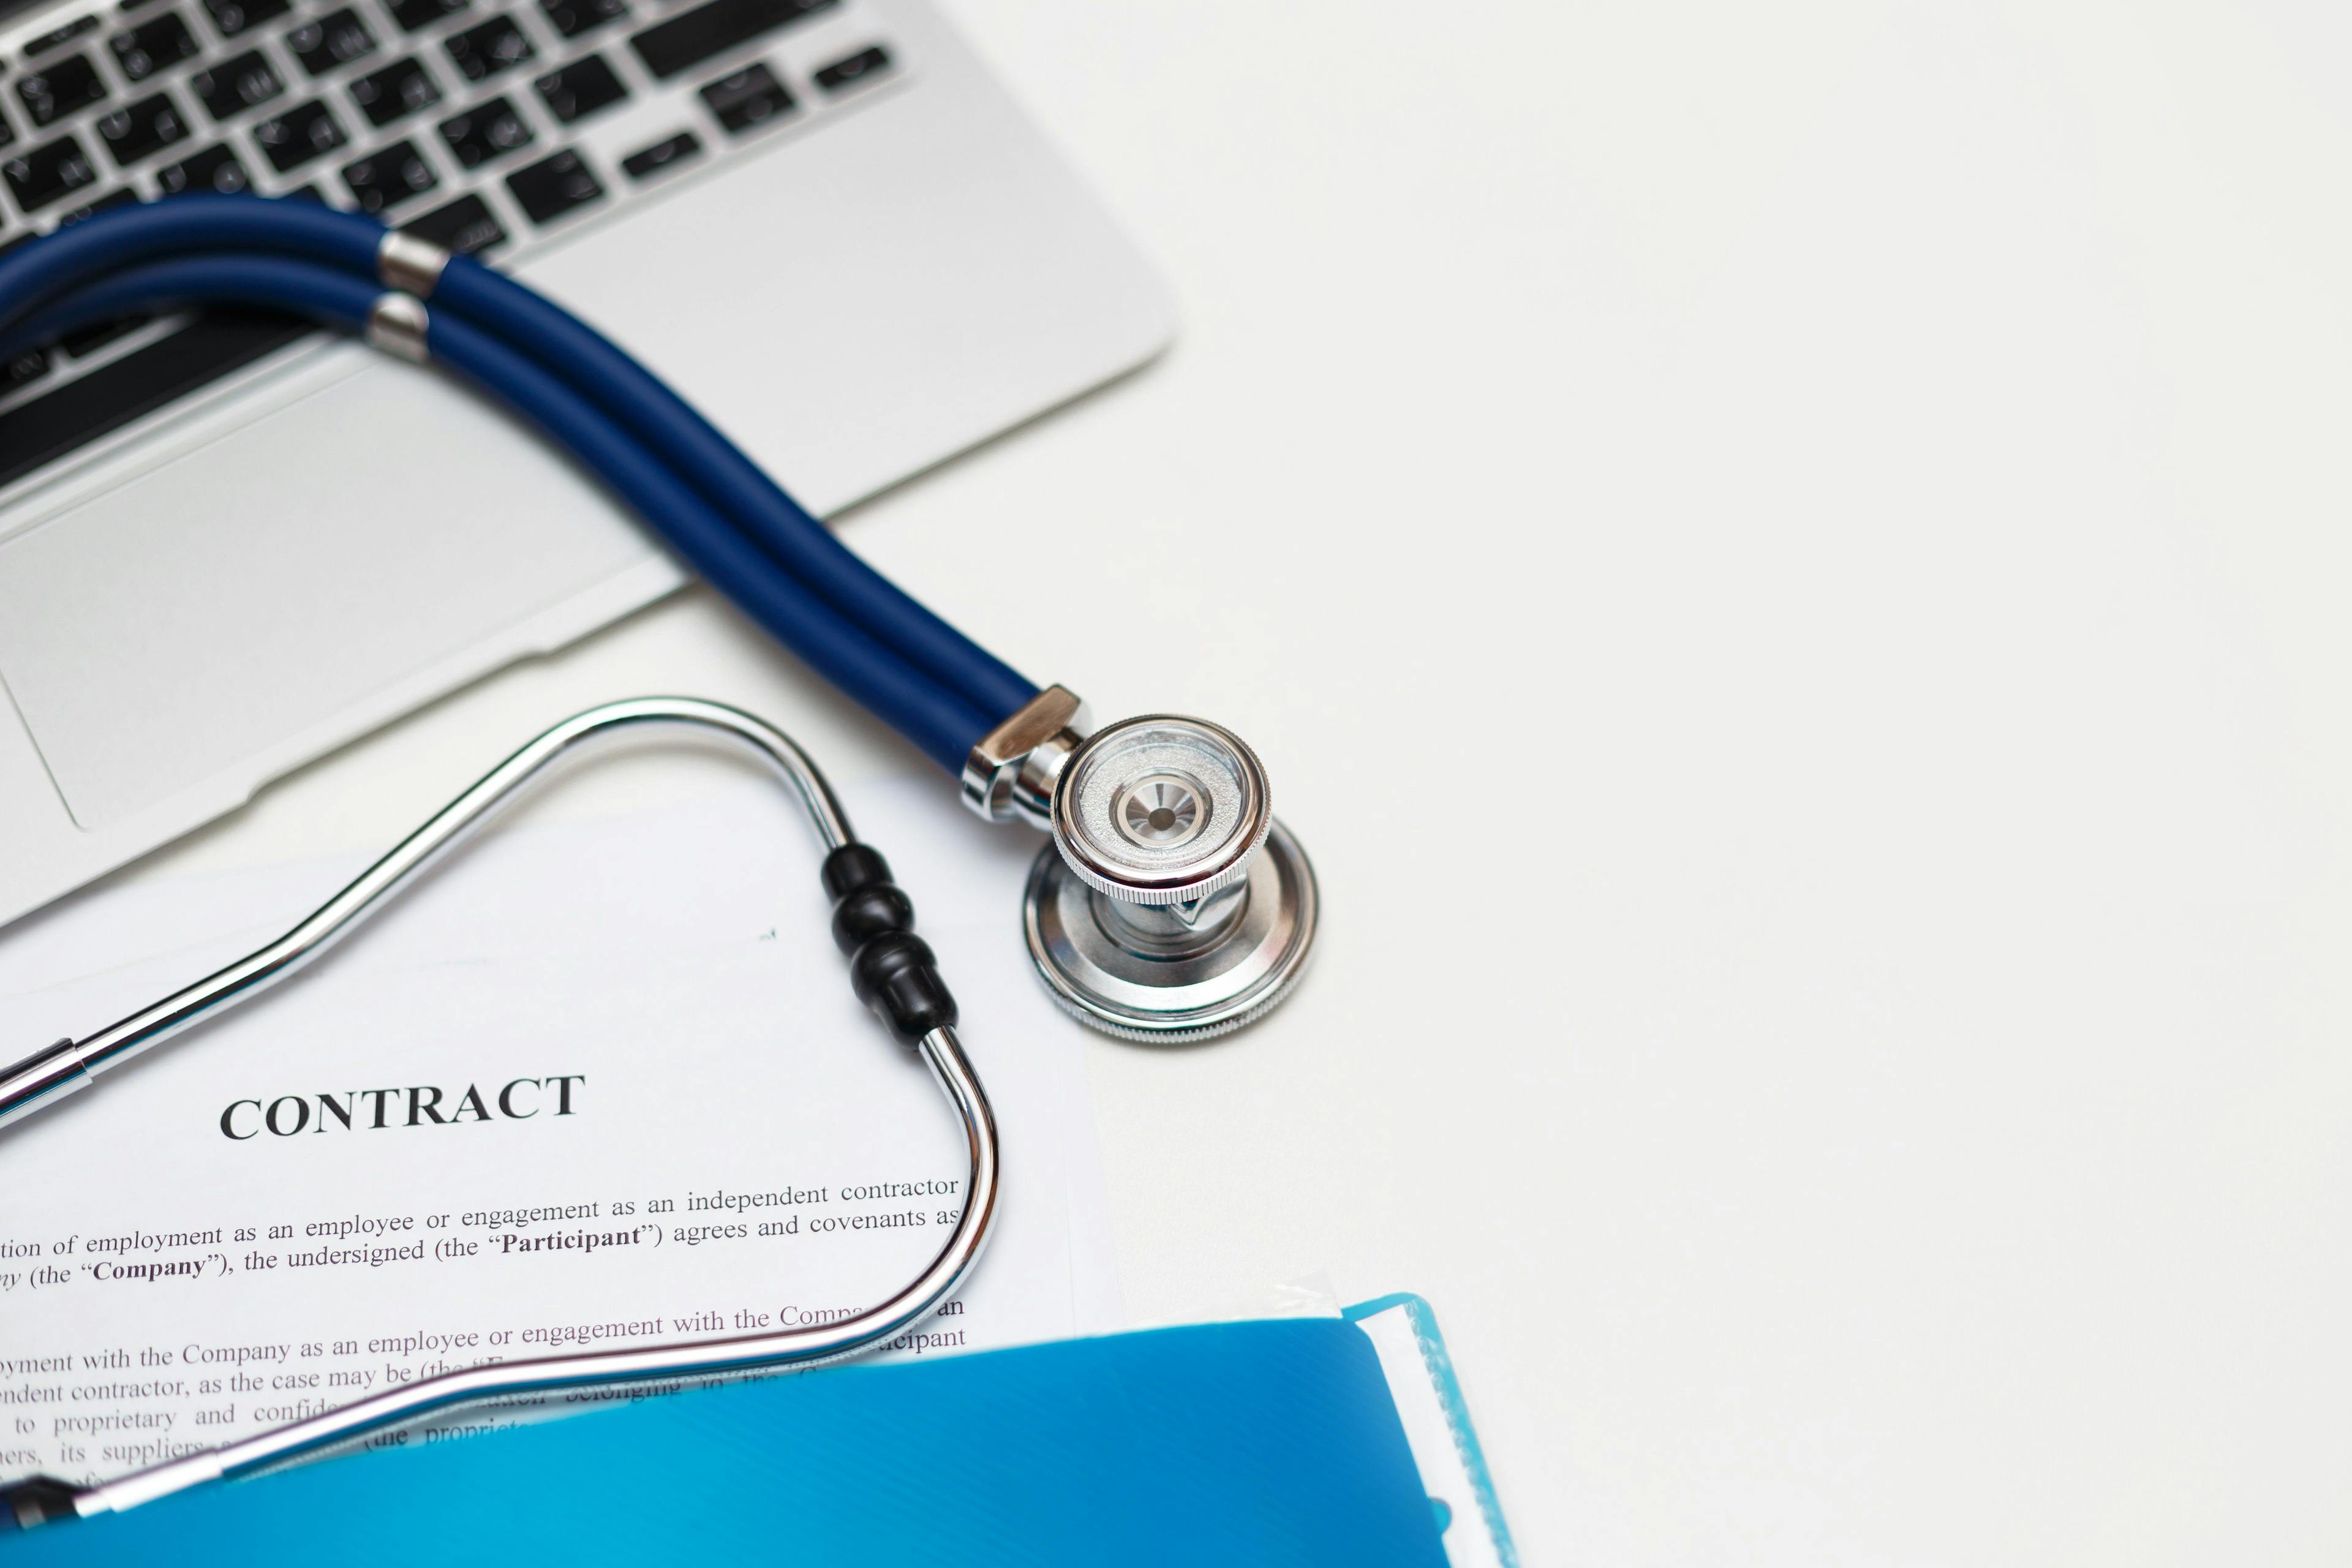 Non-compete clauses: What physicians need to know